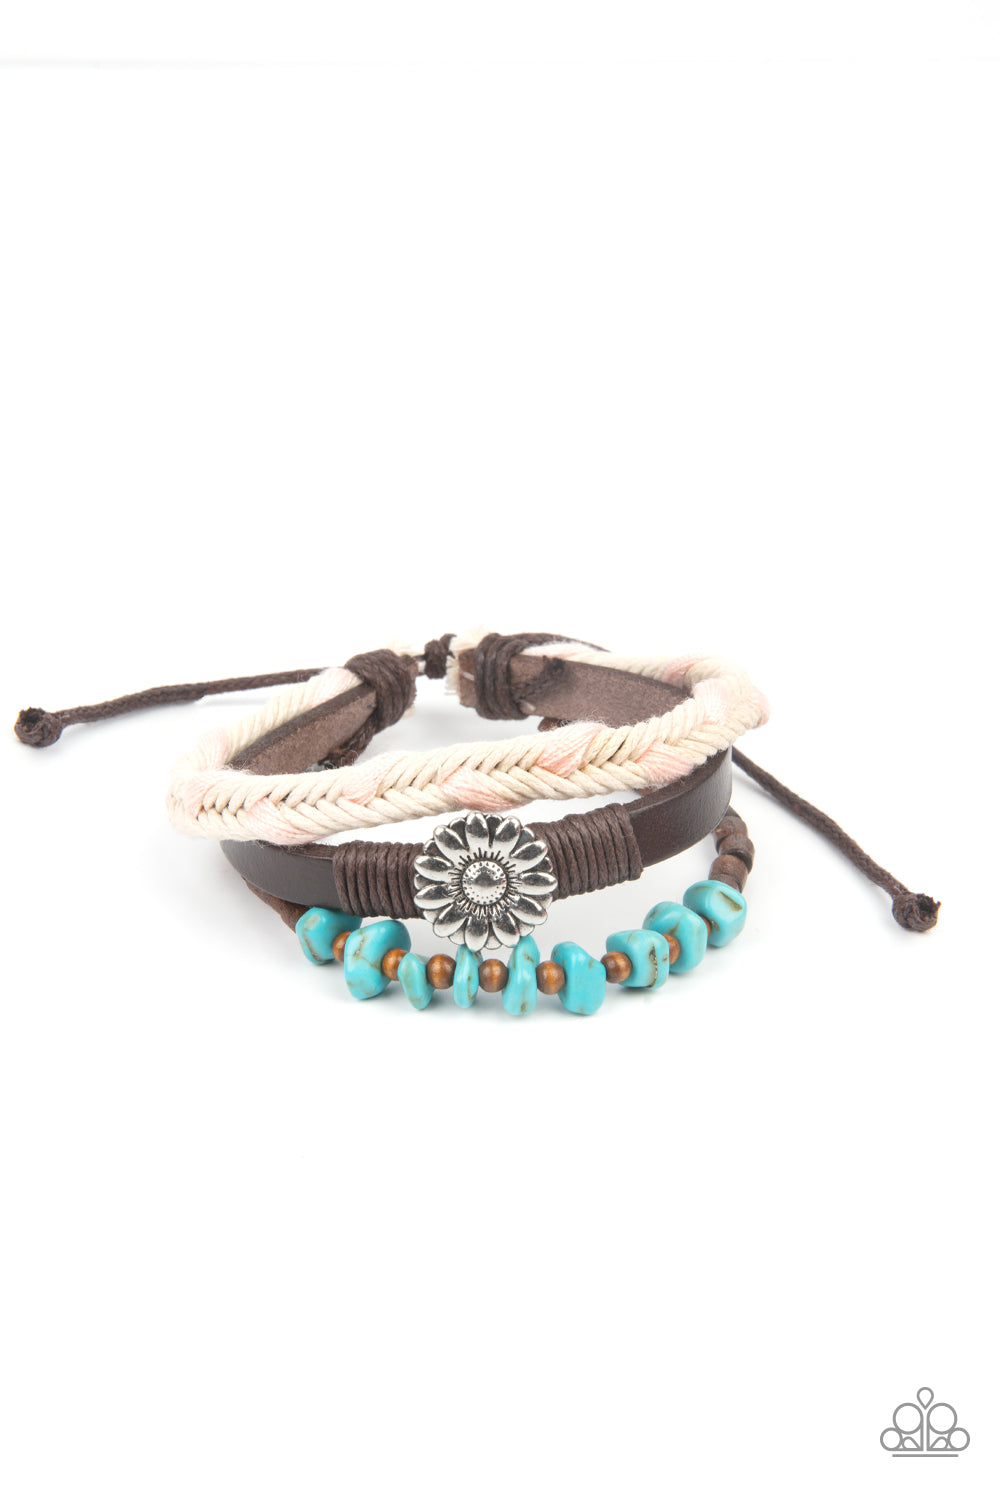 Terrain Trend Pink Urban Bracelet - Paparazzi Accessories  Featuring a silver floral centerpiece, mismatched strands of turquoise stones and wooden beads, brown leather, and braided pink and white cording layers across the wrist for a seasonal flair. Features an adjustable sliding knot closure.  All Paparazzi Accessories are lead free and nickel free!  Sold as one individual bracelet.